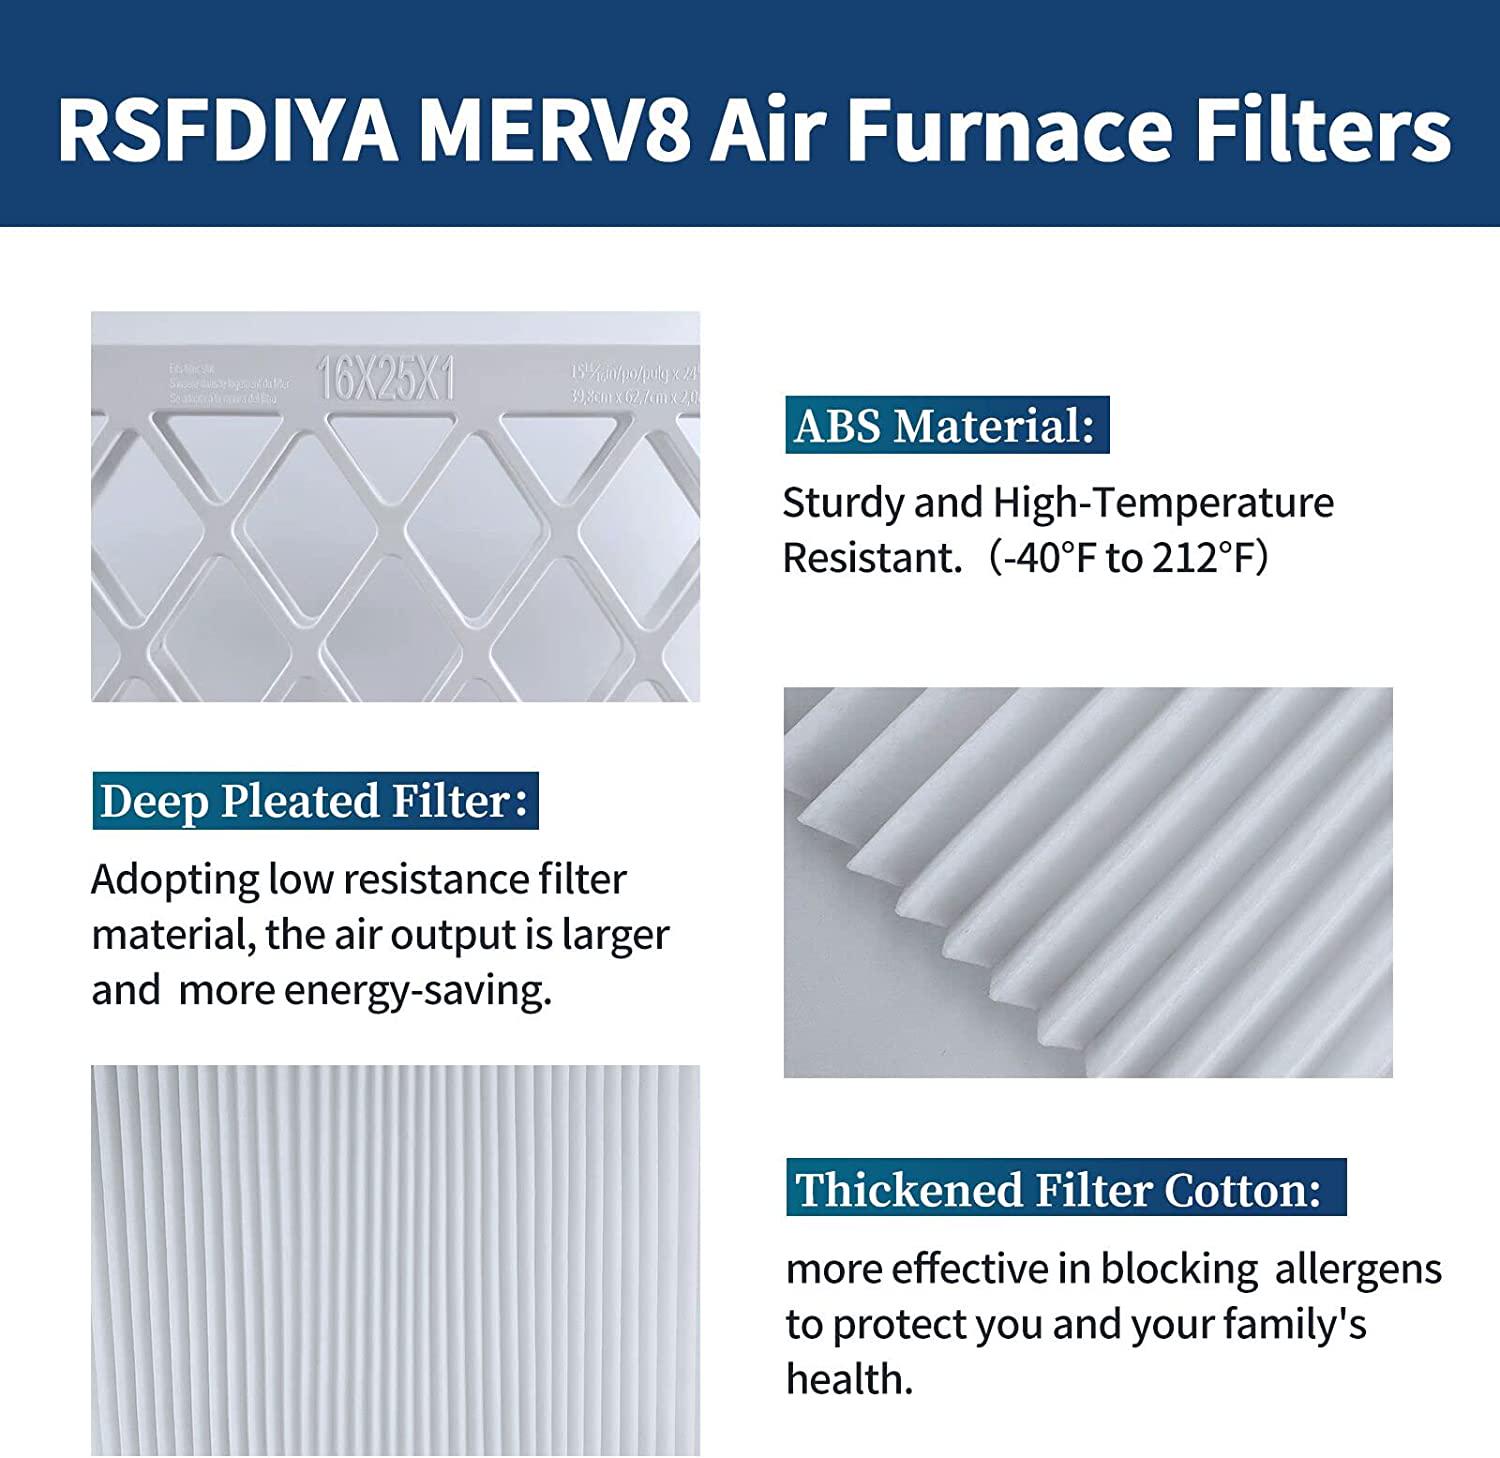 RENR Air Filter16x25x1， 9-Pack MERV8 MPR 600 AC Furnace Air Filters， 1x Reusable Frame+9 x Filter Medias， HVAC Filters， Deep Pleated Air Cleaner， Breathe Safer Home and Office Environments